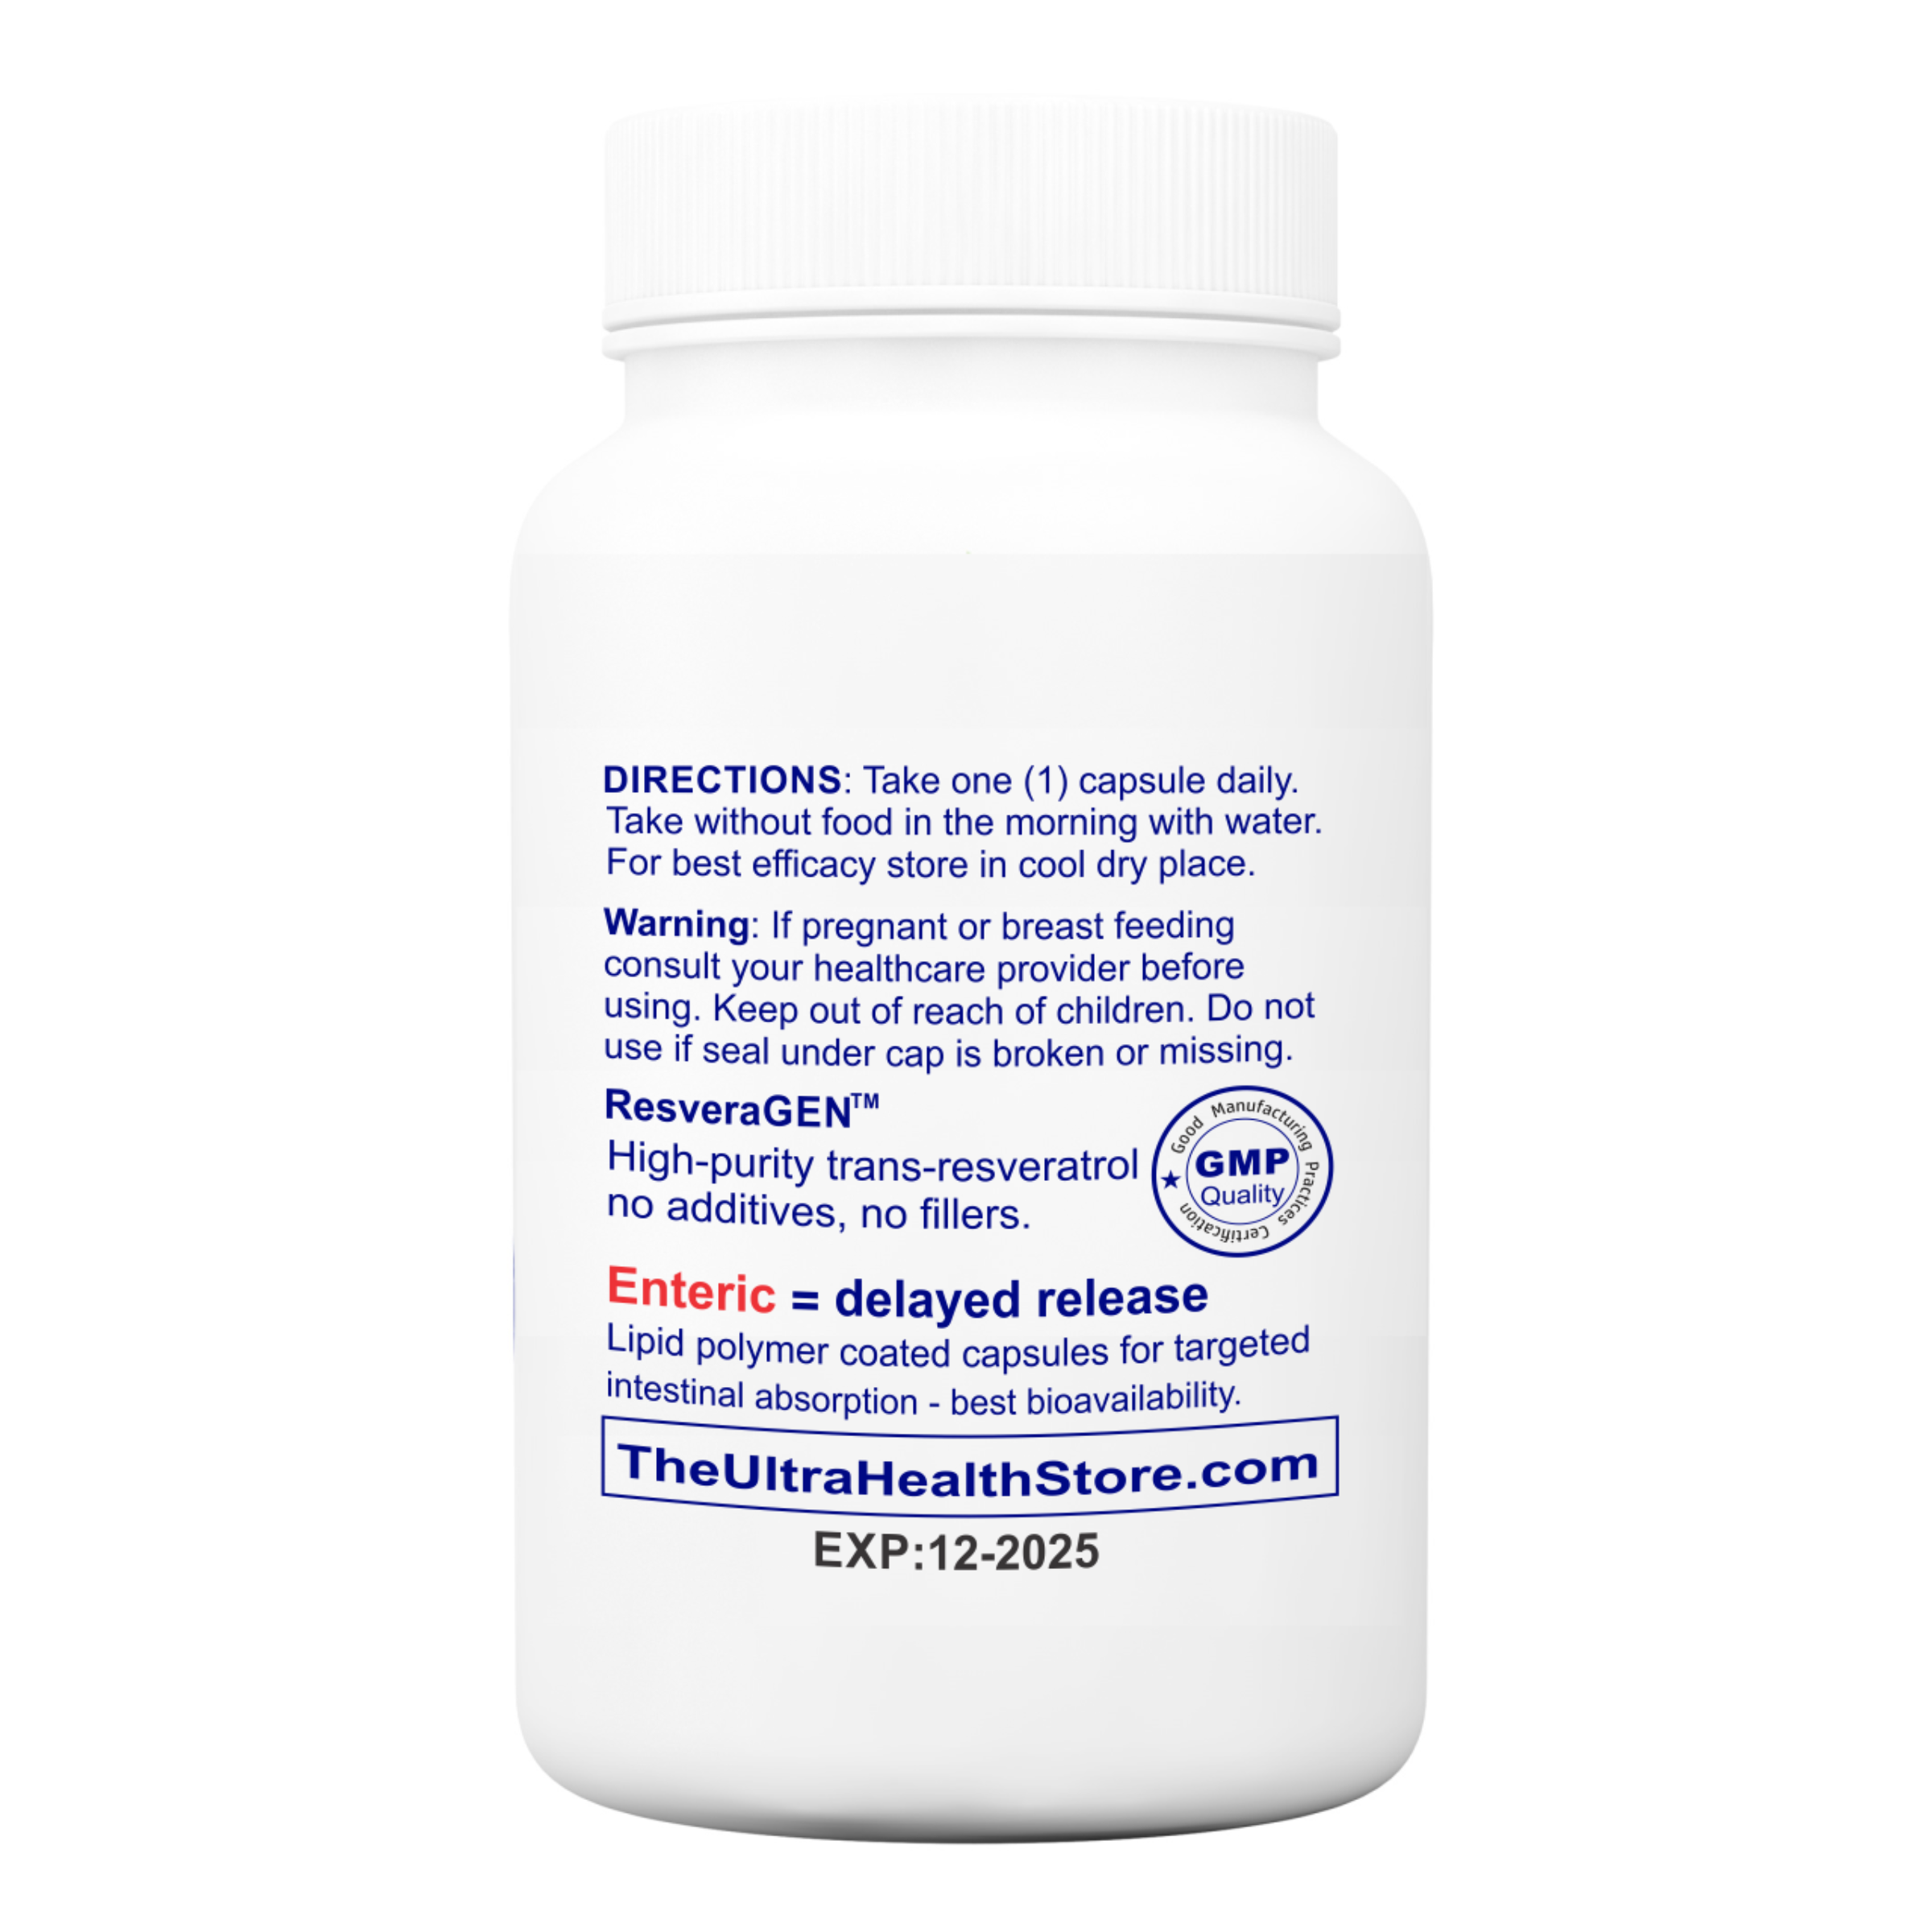 ResveraGEN™ 60 INTL ENTERIC (Resveratrol): Ultra-pure Pharmaceutical Grade 300mg (Resveratrol: CAS No. 501-36-0), 60-Day Supply, not extracted but synthesized, no additives